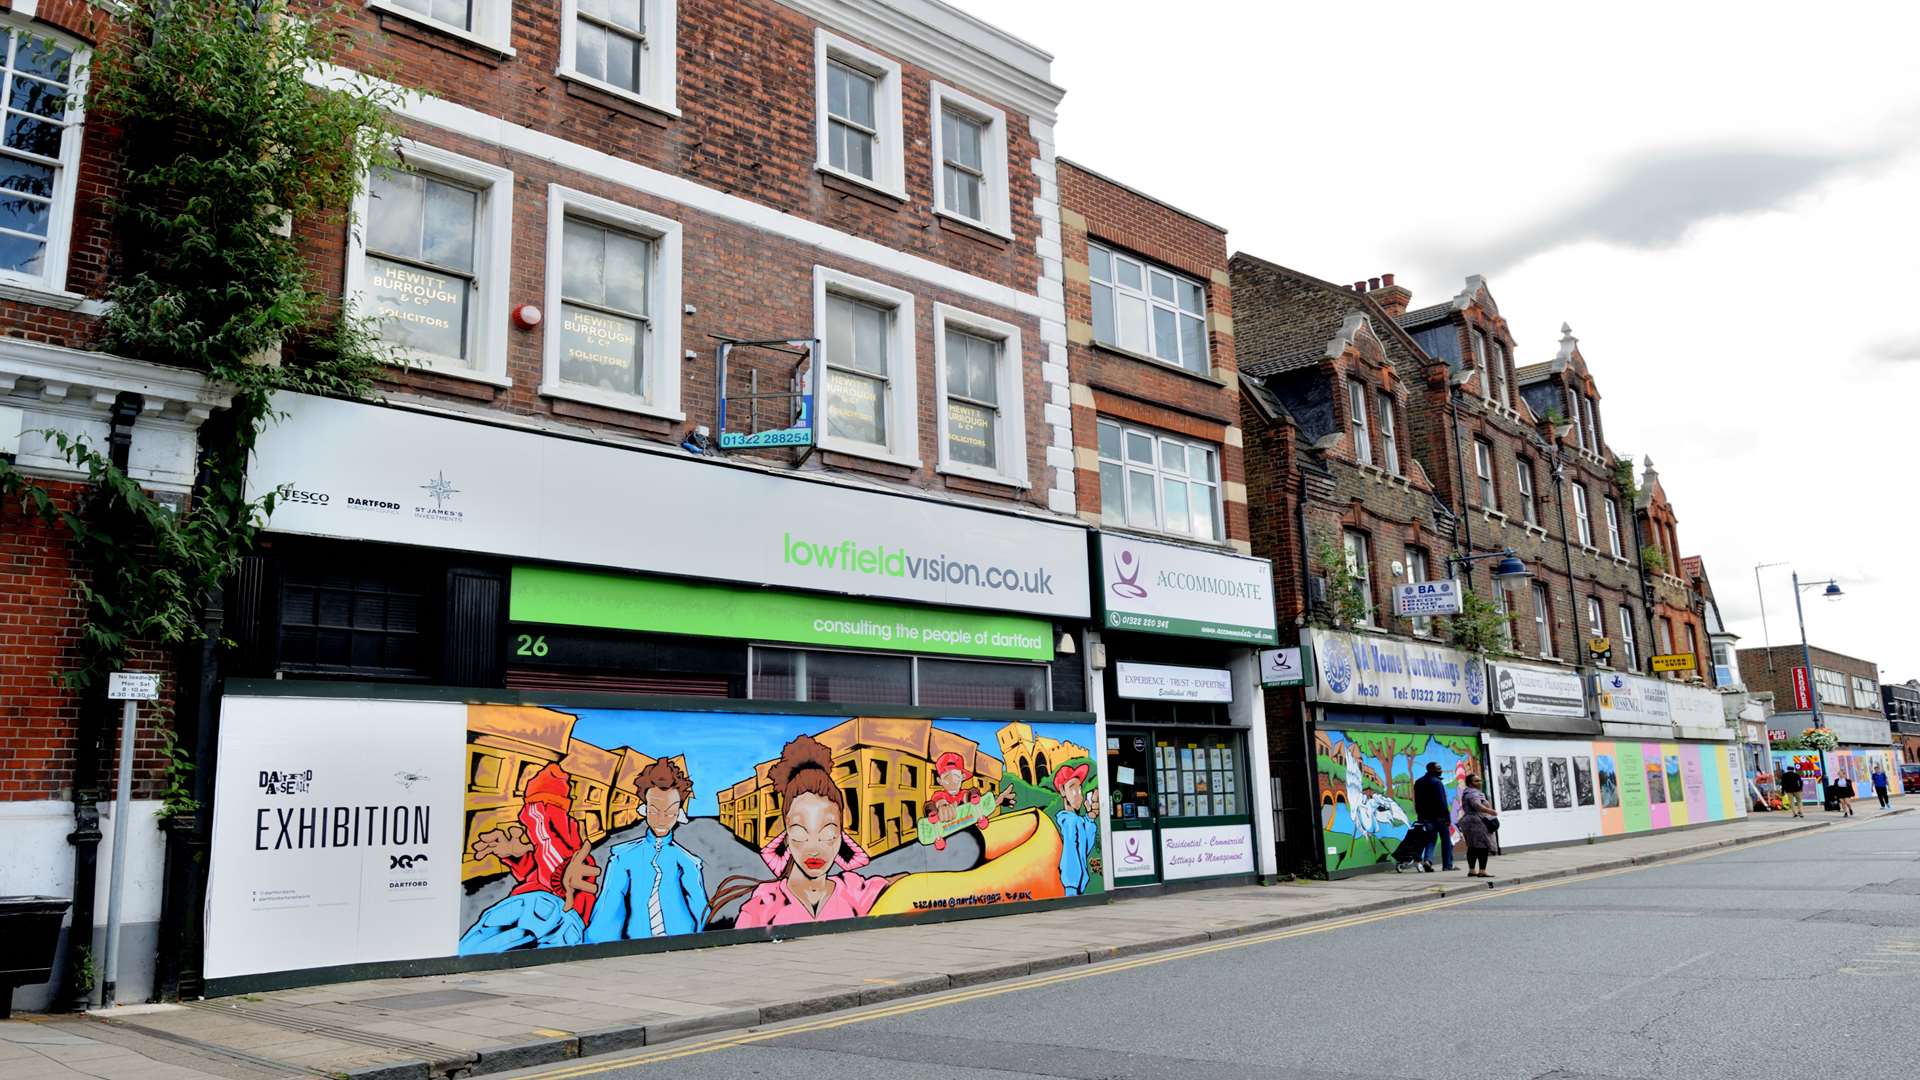 Hoardings were brightened up with artwork but the road is still and eyesore